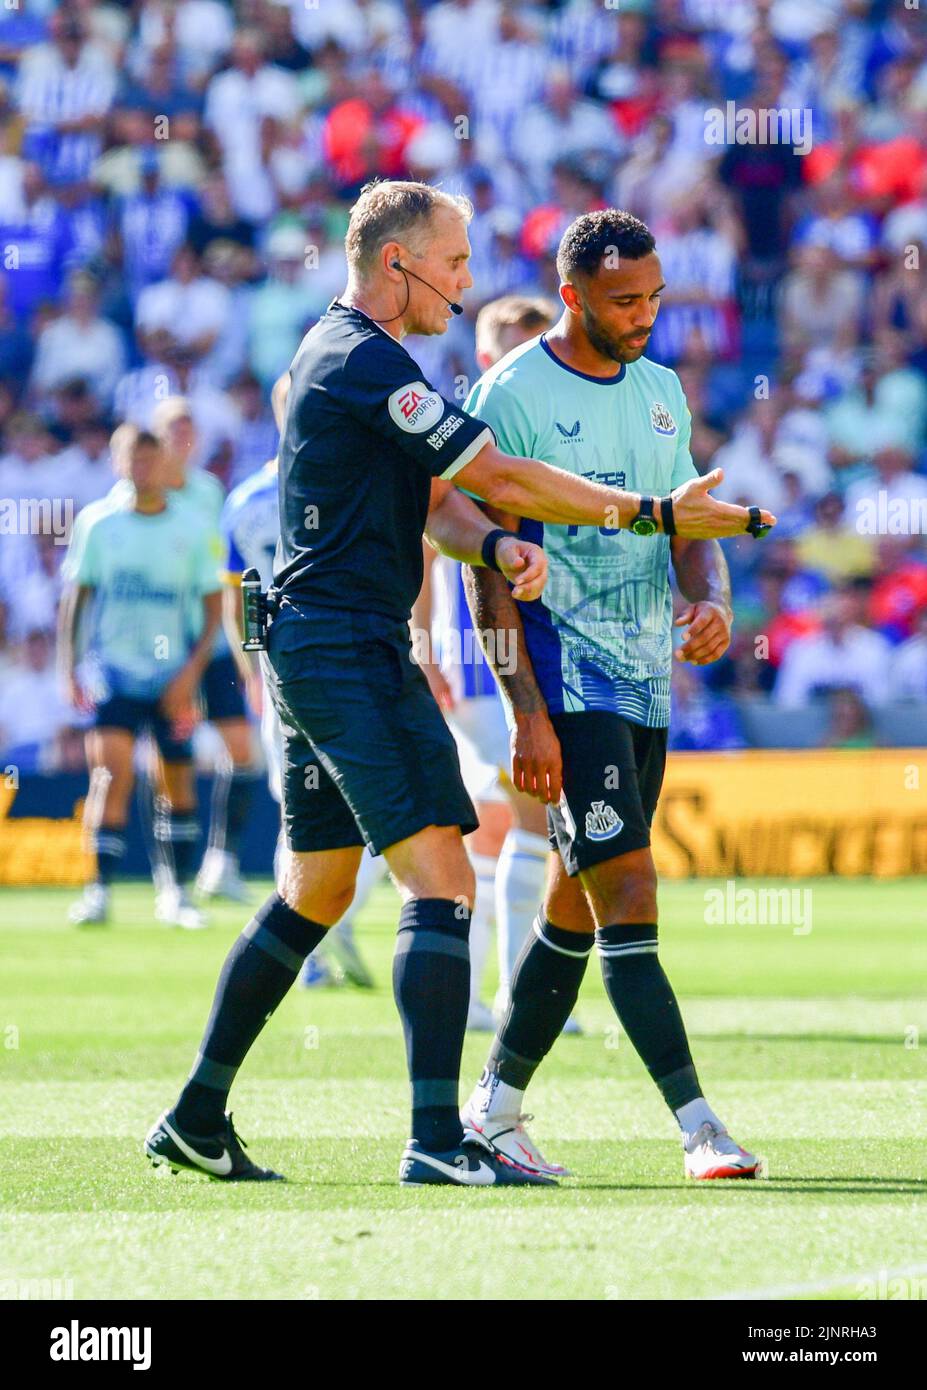 Brighton, UK. 13th Aug, 2022. Callum Wilson of Newcastle United is told to hurry up and leave the field by referee Graham Scott after he was substituted during the Premier League match between Brighton & Hove Albion and Newcastle United at The Amex on August 13th 2022 in Brighton, England. (Photo by Jeff Mood/phcimages.com) Credit: PHC Images/Alamy Live News Stock Photo